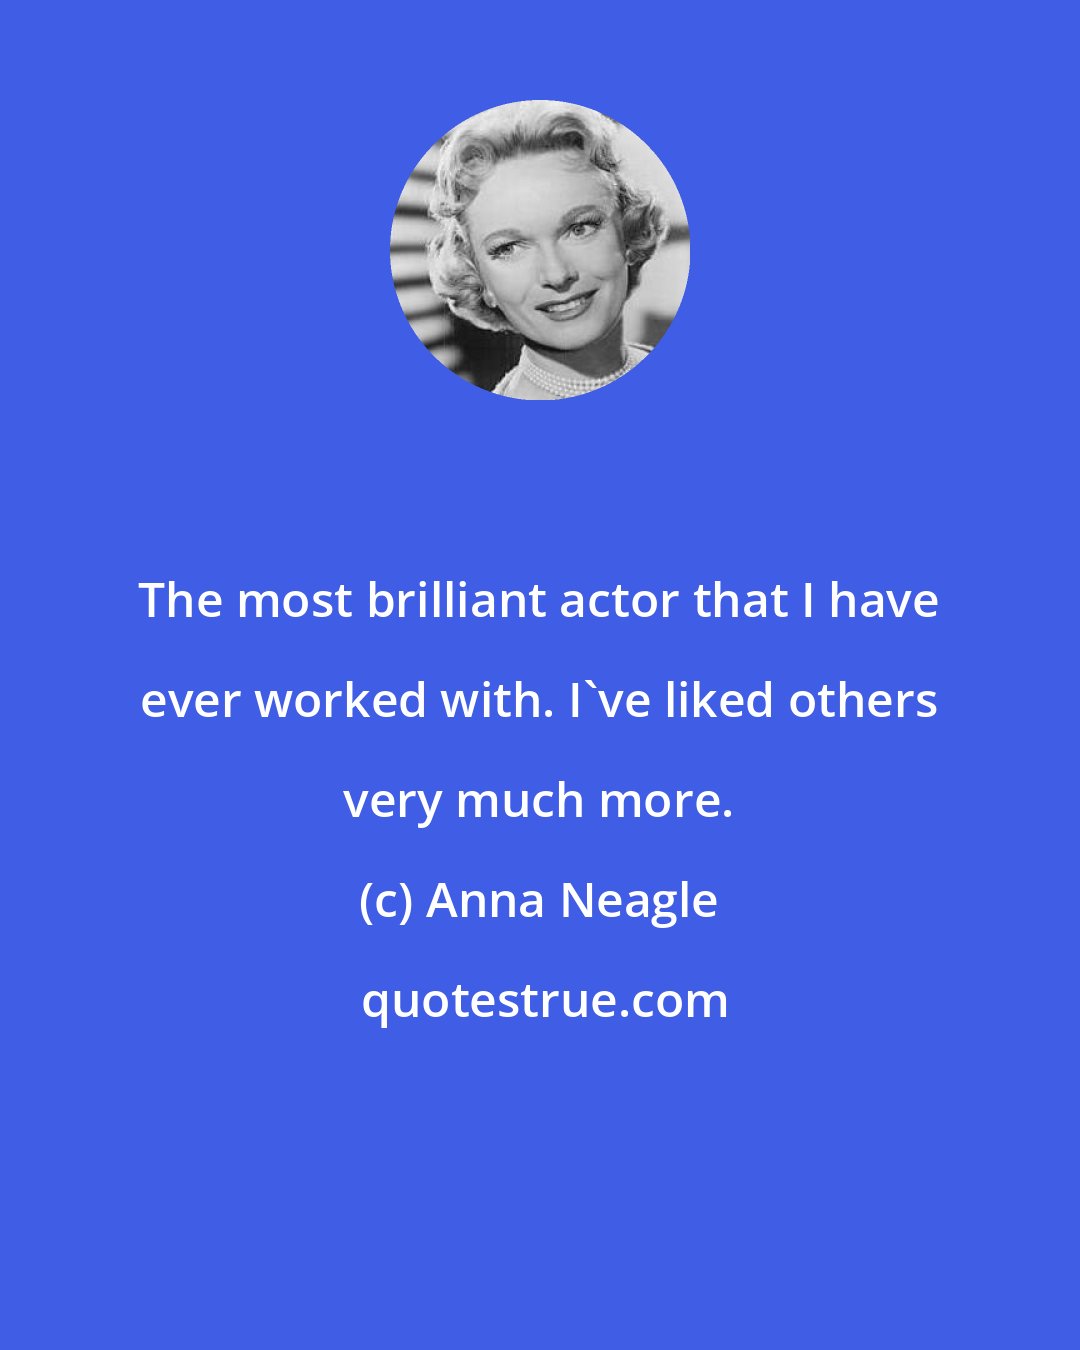 Anna Neagle: The most brilliant actor that I have ever worked with. I've liked others very much more.